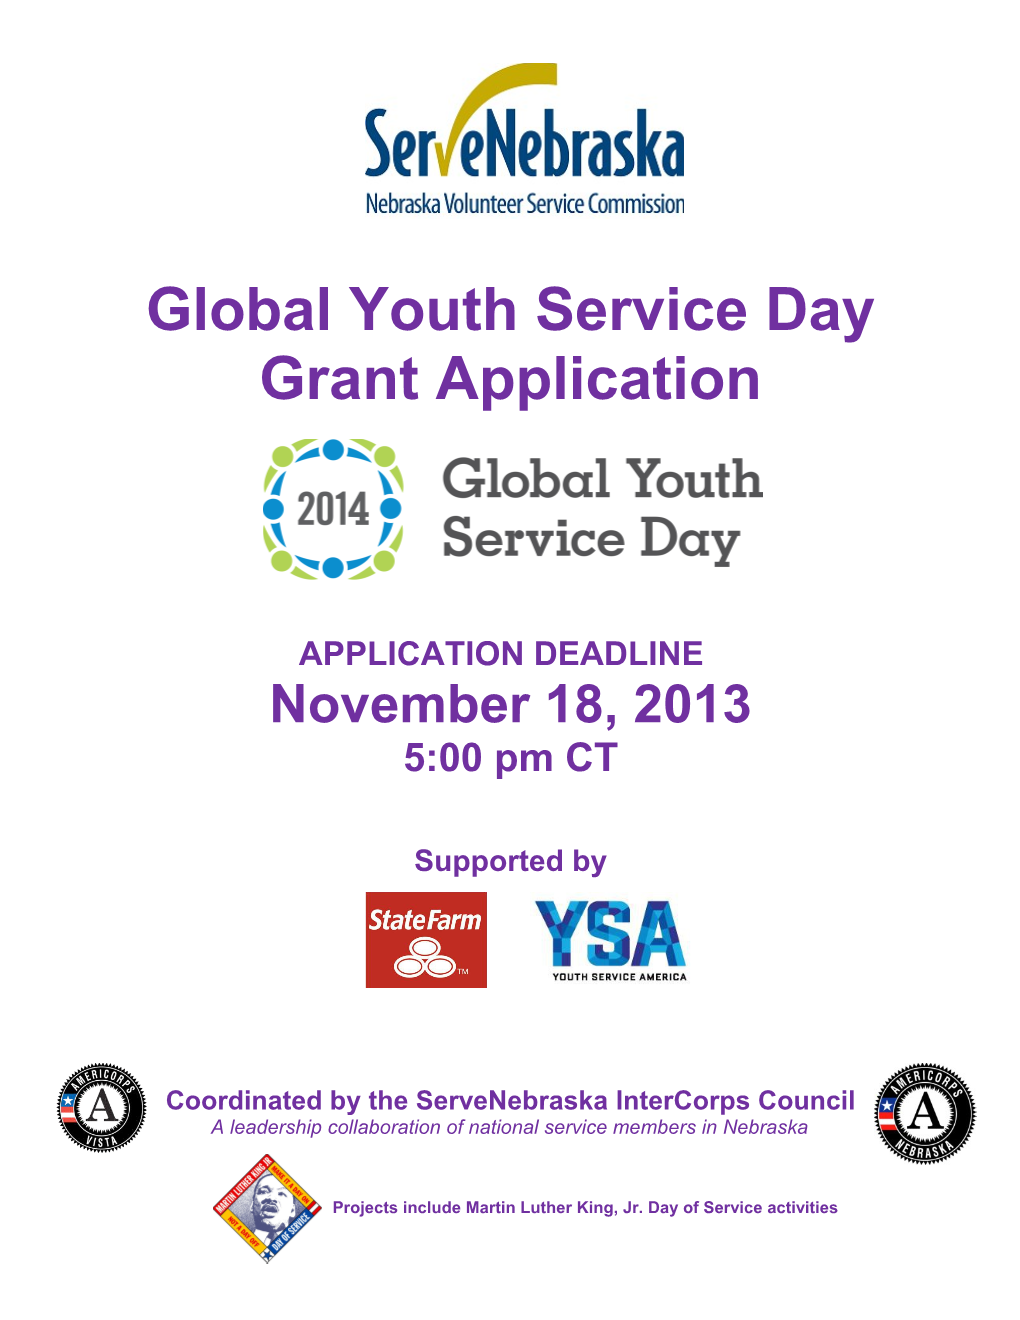 Americorps Intercorps Council National and Global Youth Service Day